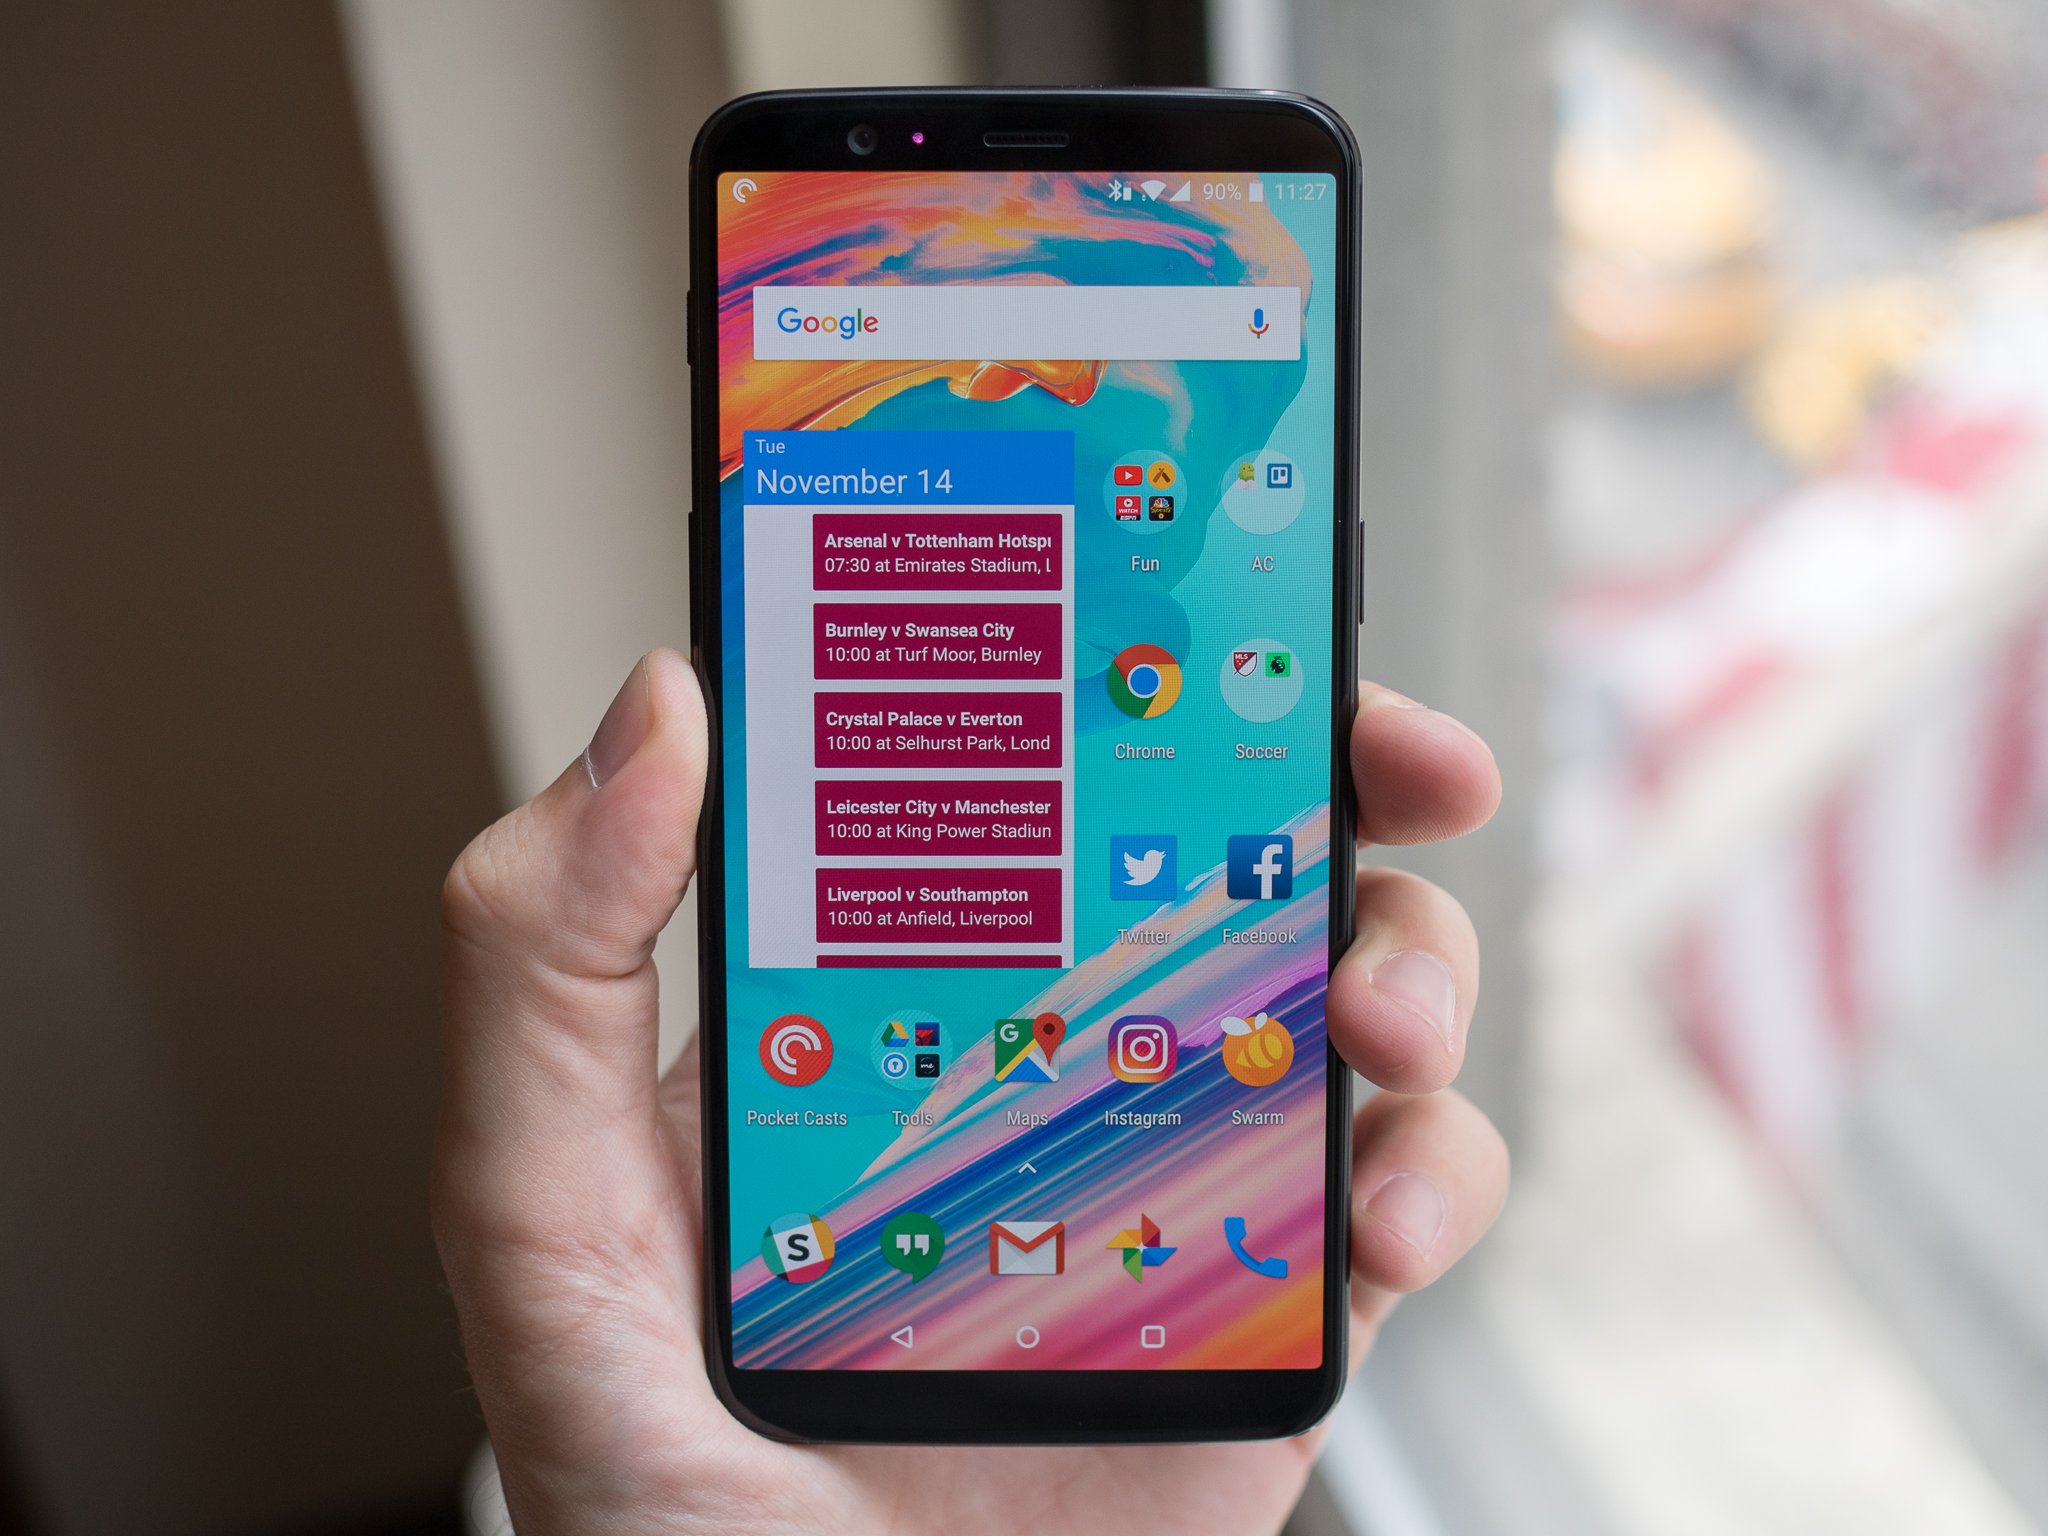 OnePlus 5T wallpapers right here